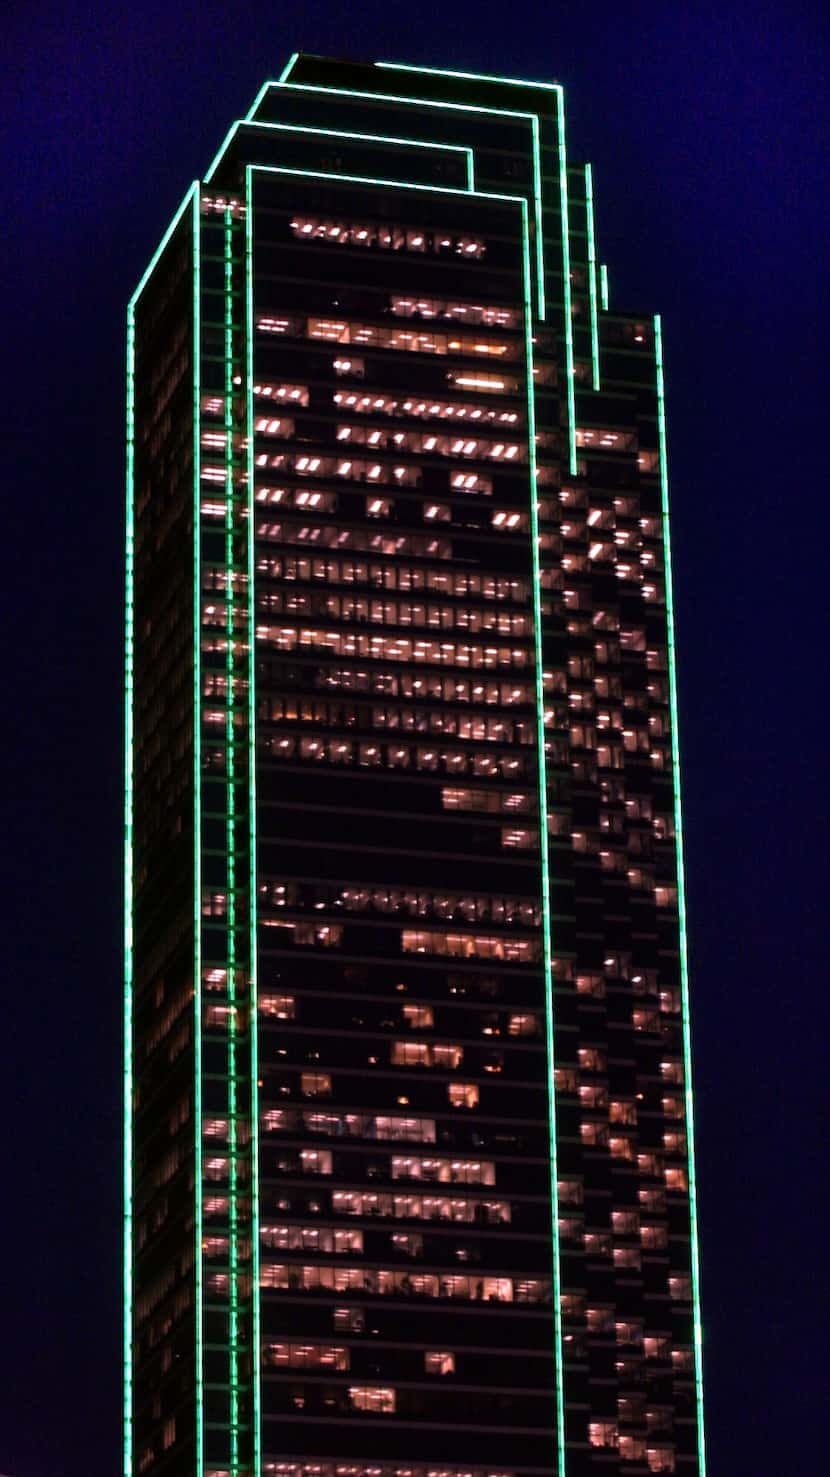 For most of its more than 30 years, the 72-story Bank of America Plaza tower has been...